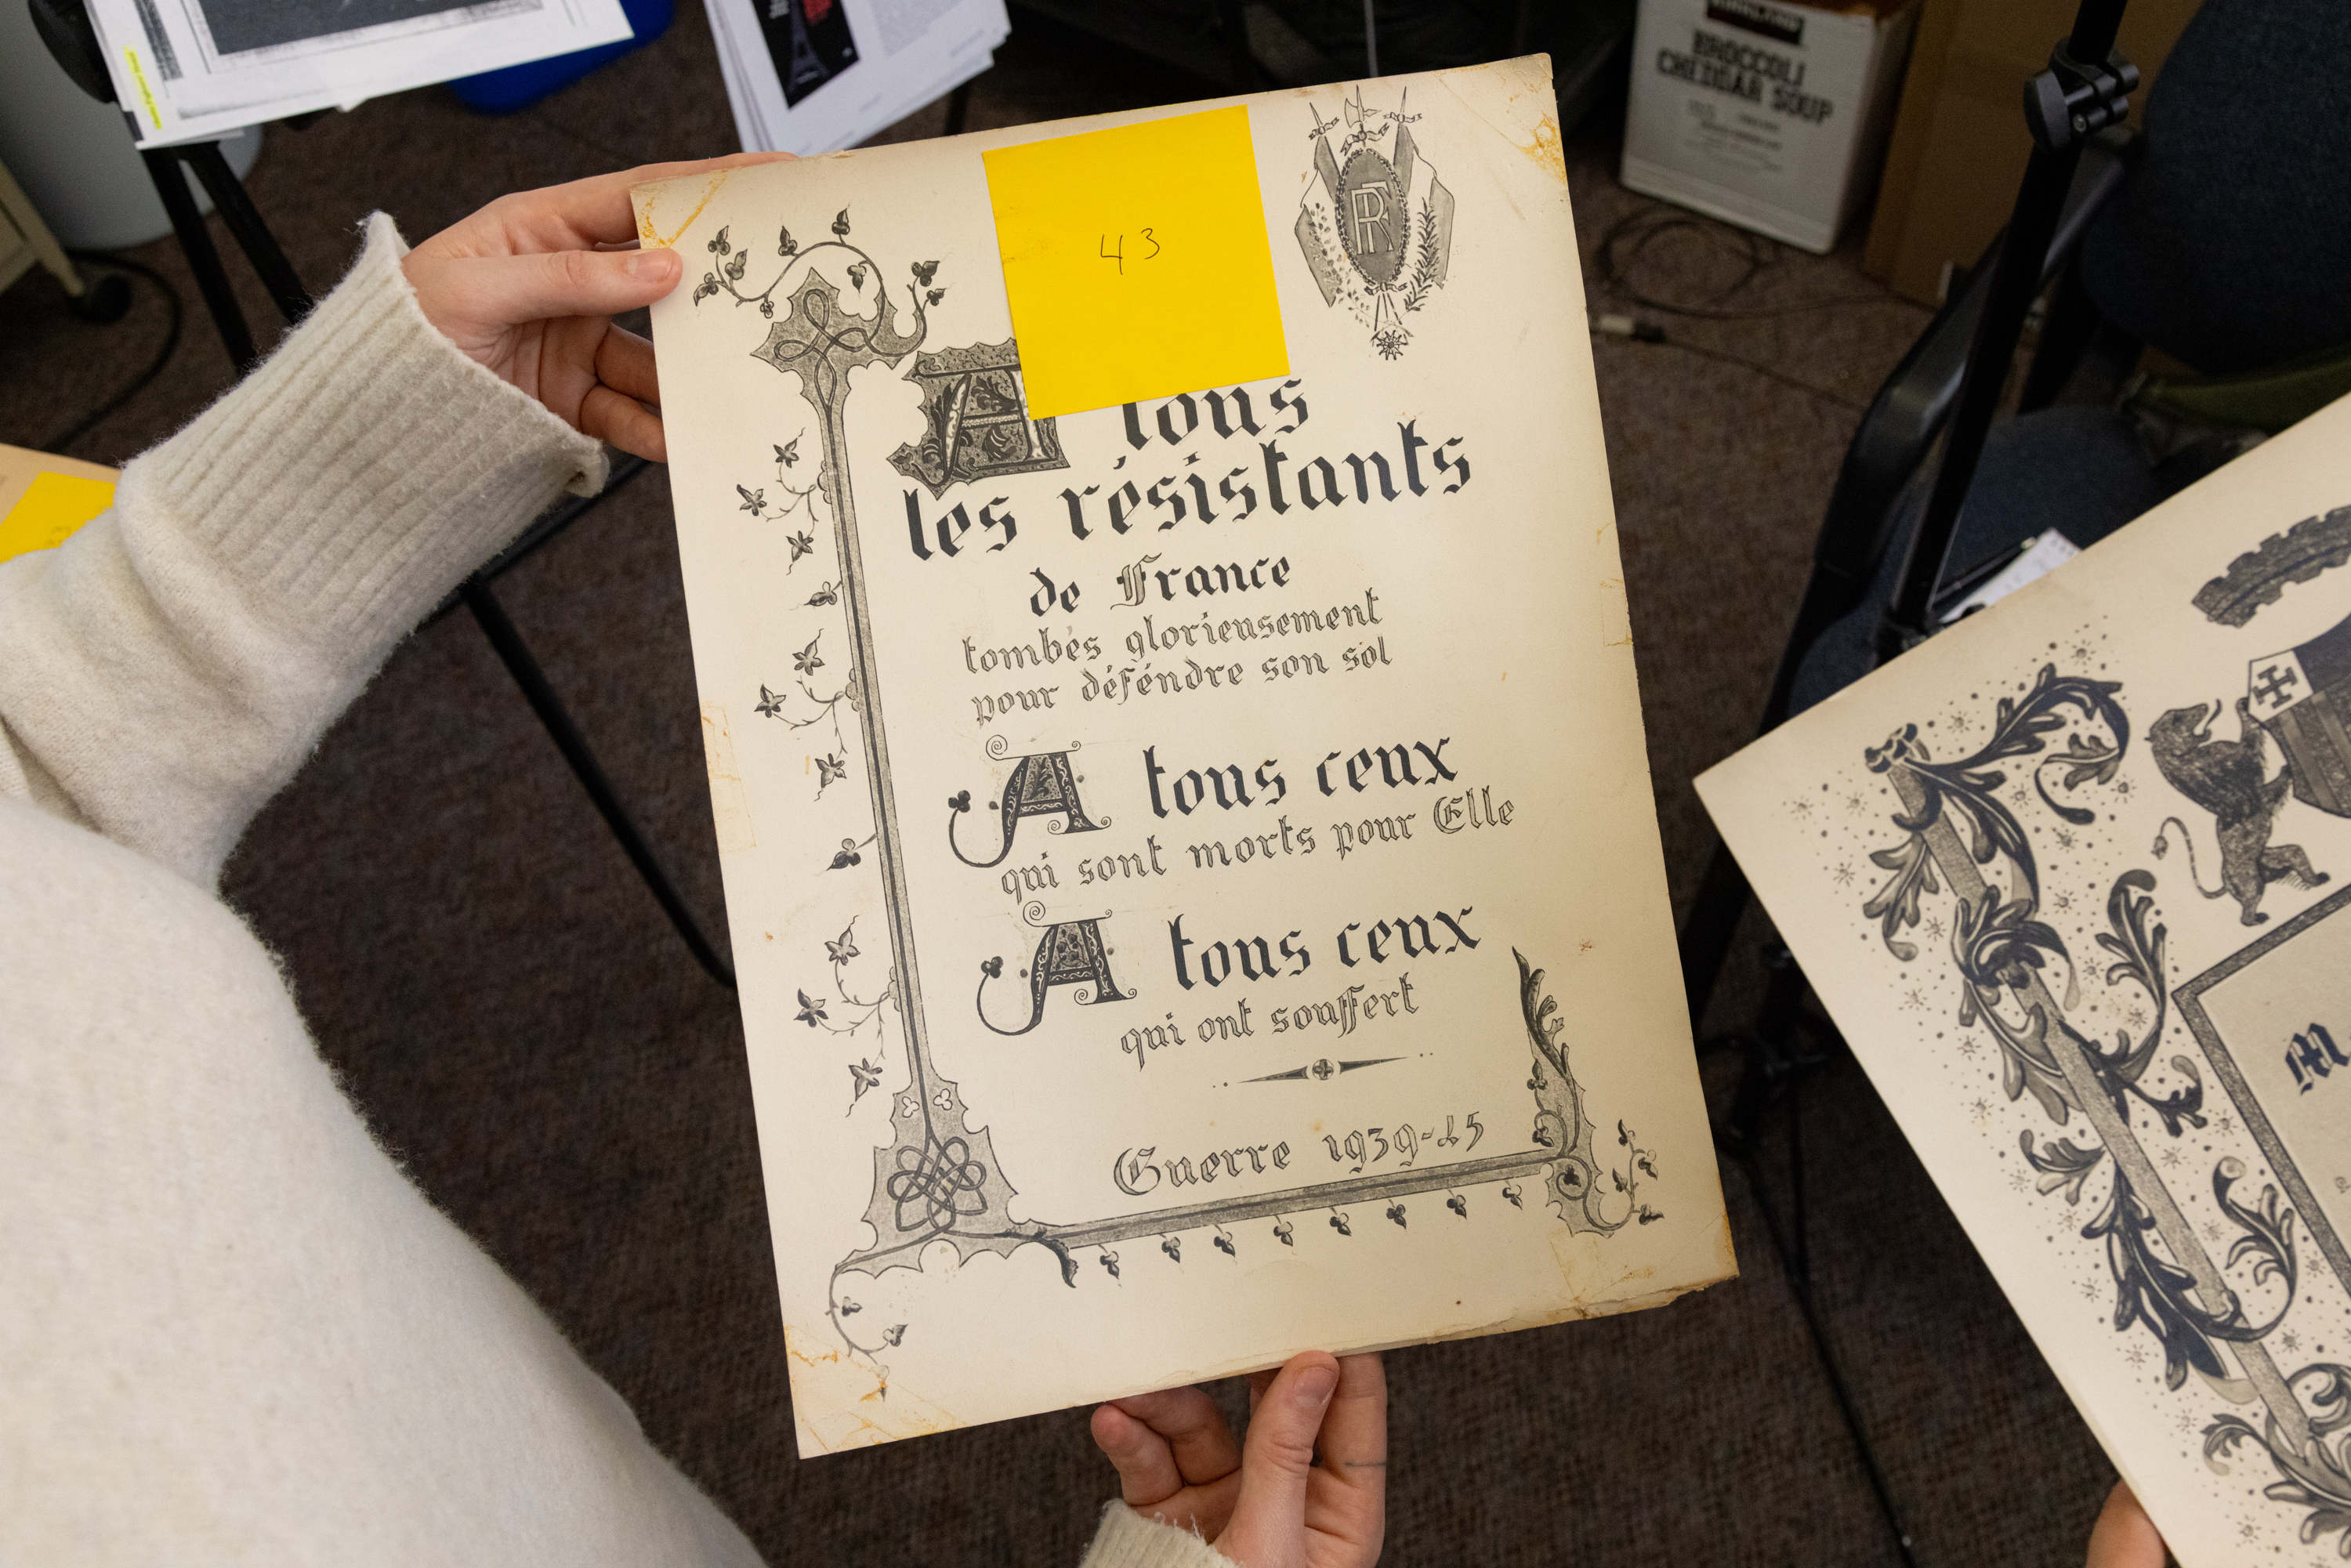 Hands holding an old document with French text, floral designs, and a yellow sticky note.